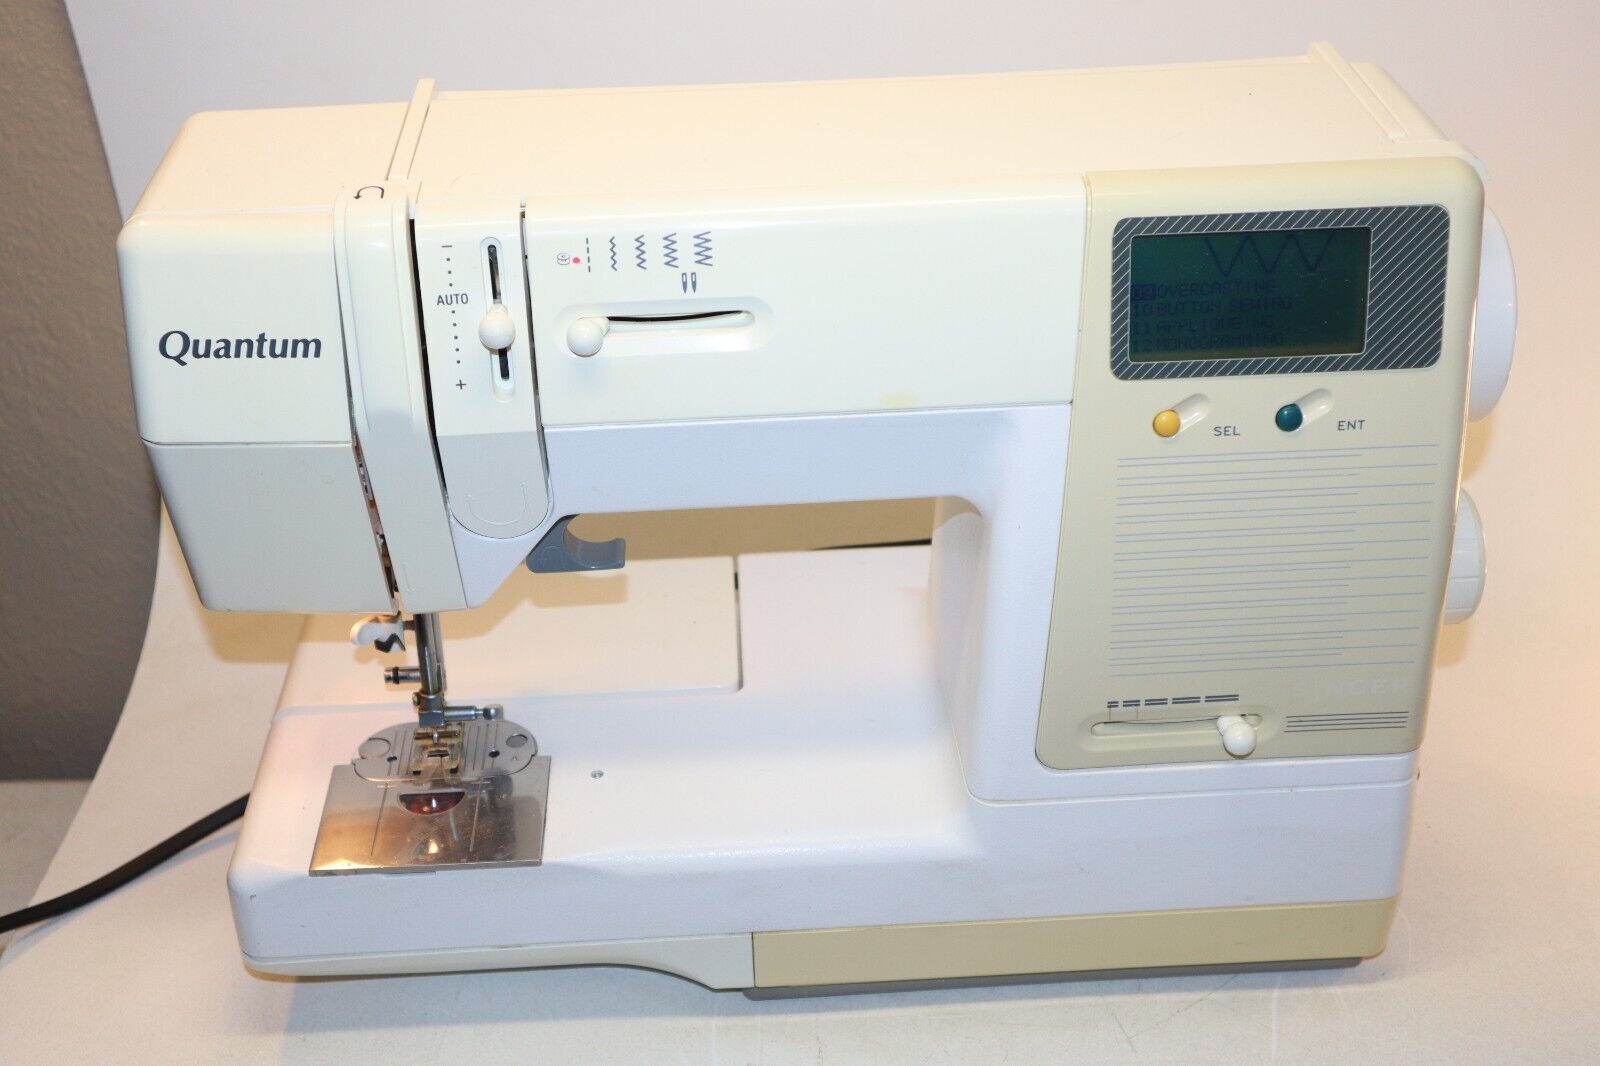 VTG Singer Quantum Model 9240 Electronic Sewing Machine with Accessories WORKS - $118.79